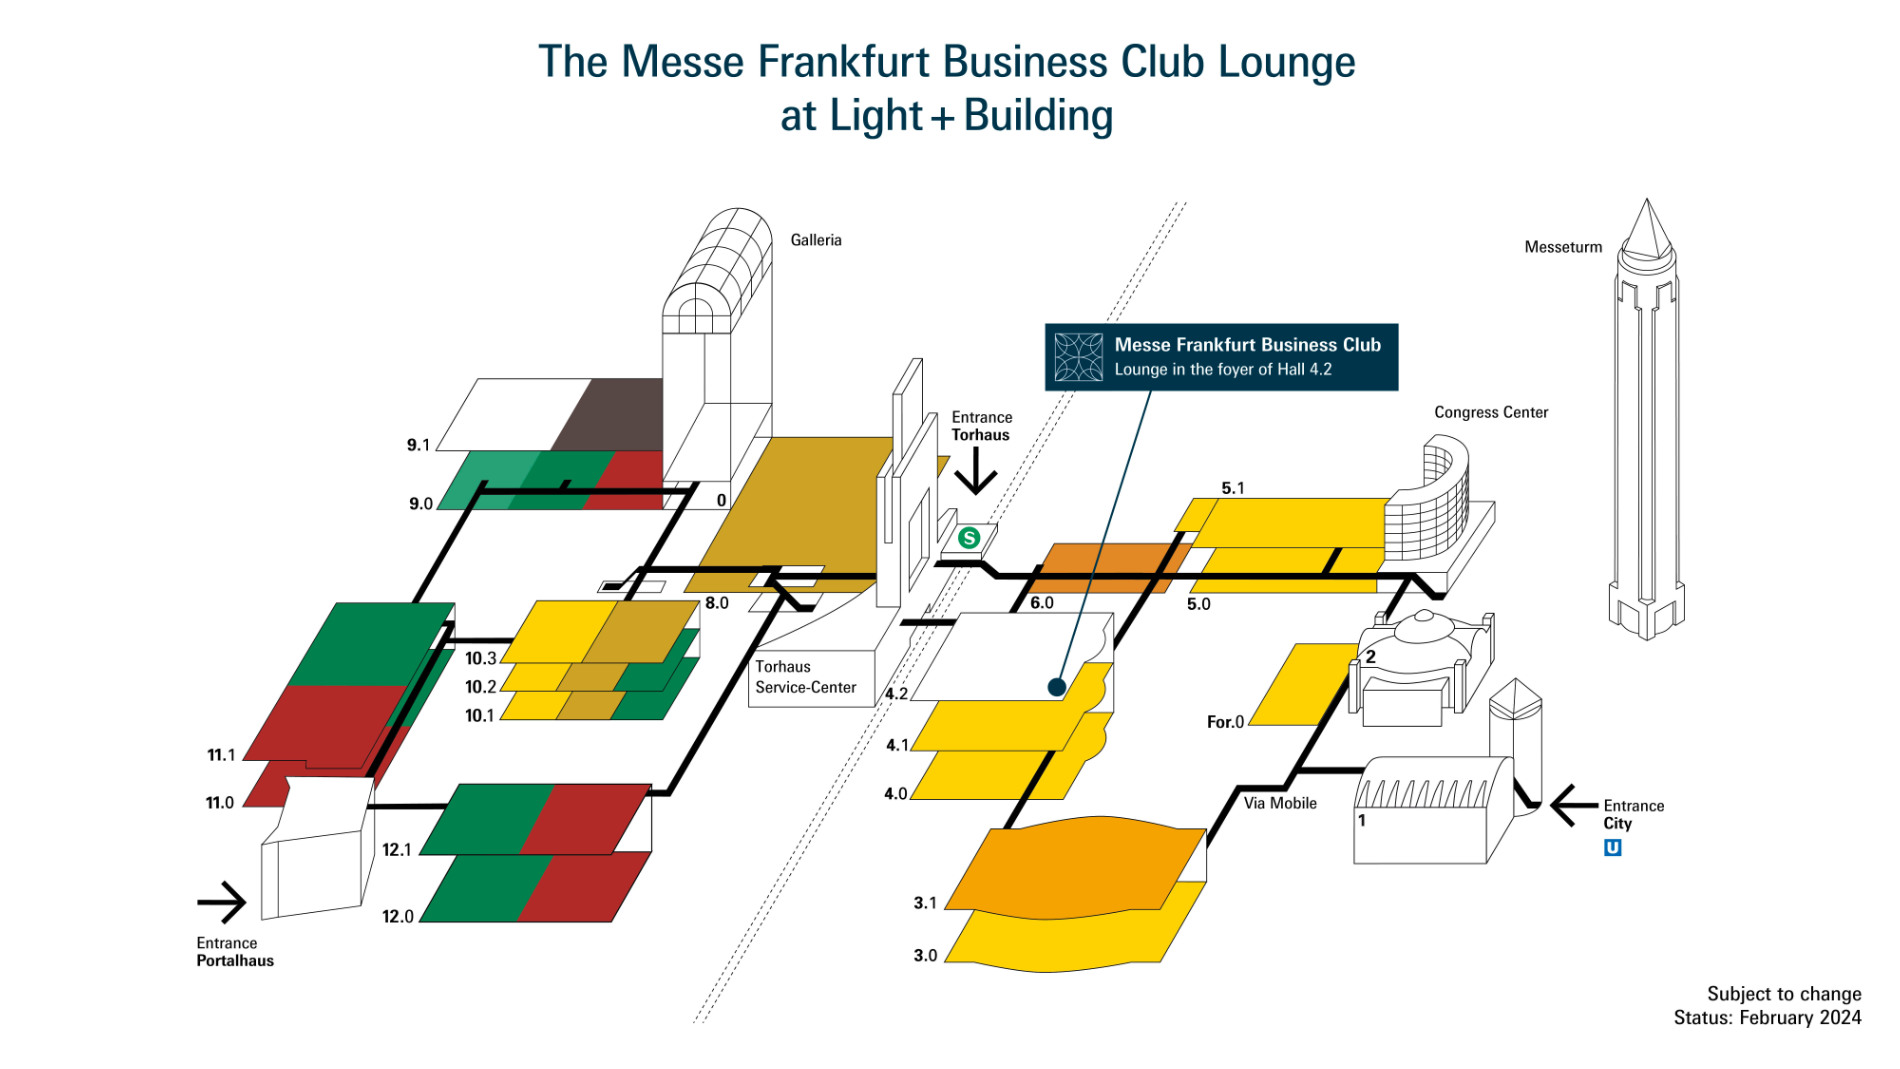 Ground Plan of the Business Club